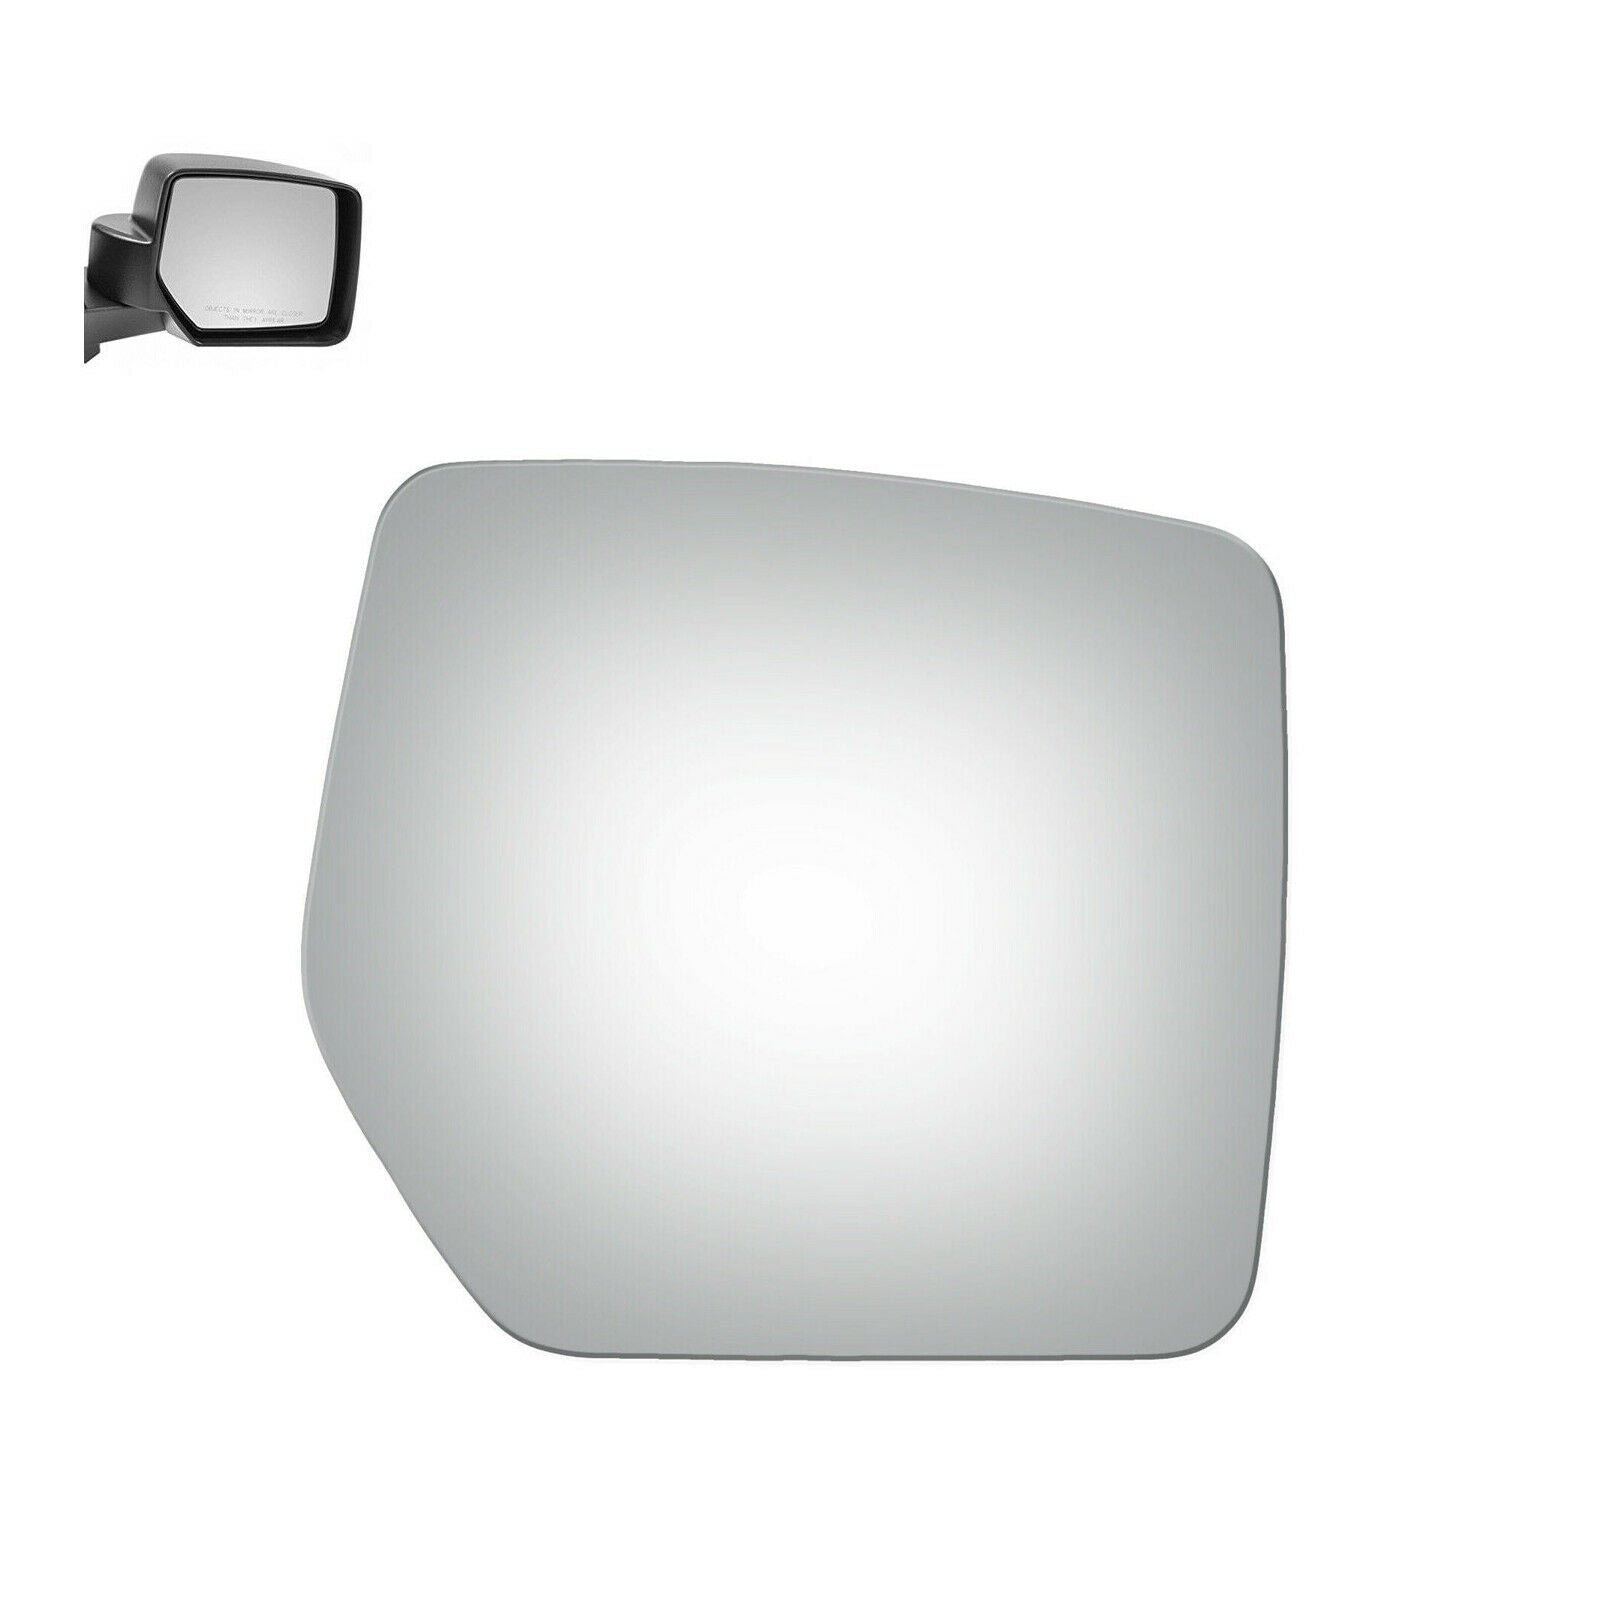 WLLW Replacement Mirror Glass for 2008-2012 Jeep Liberty/2007-2017 Jeep Patriot, Driver Left Side LH/Passenger Right Side RH/The Both Sides Flat Convex M-0059